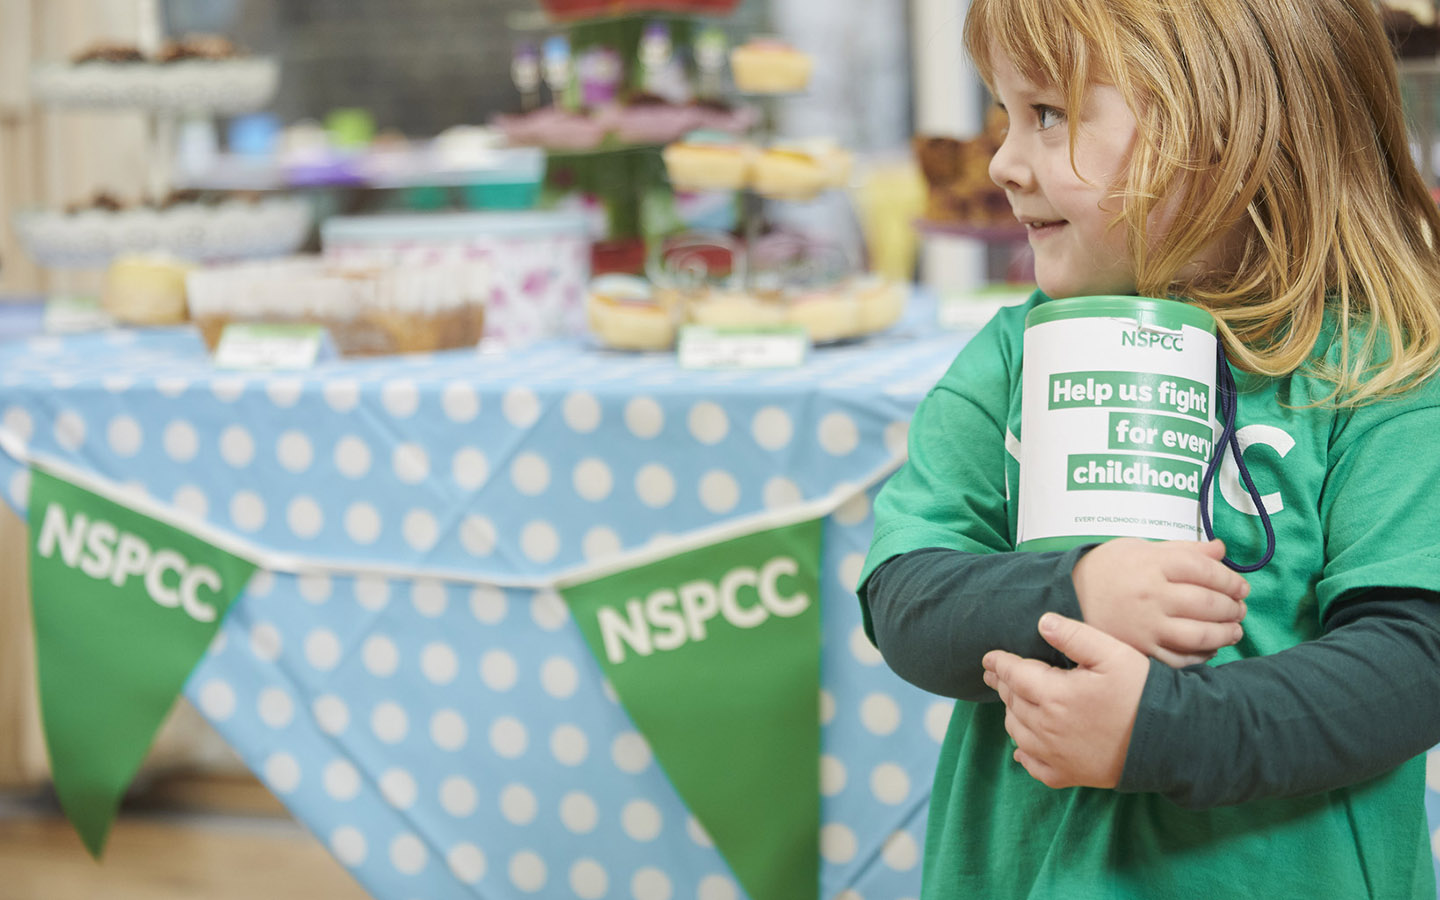 A young girl smiling while holding an NSPCC collection box.